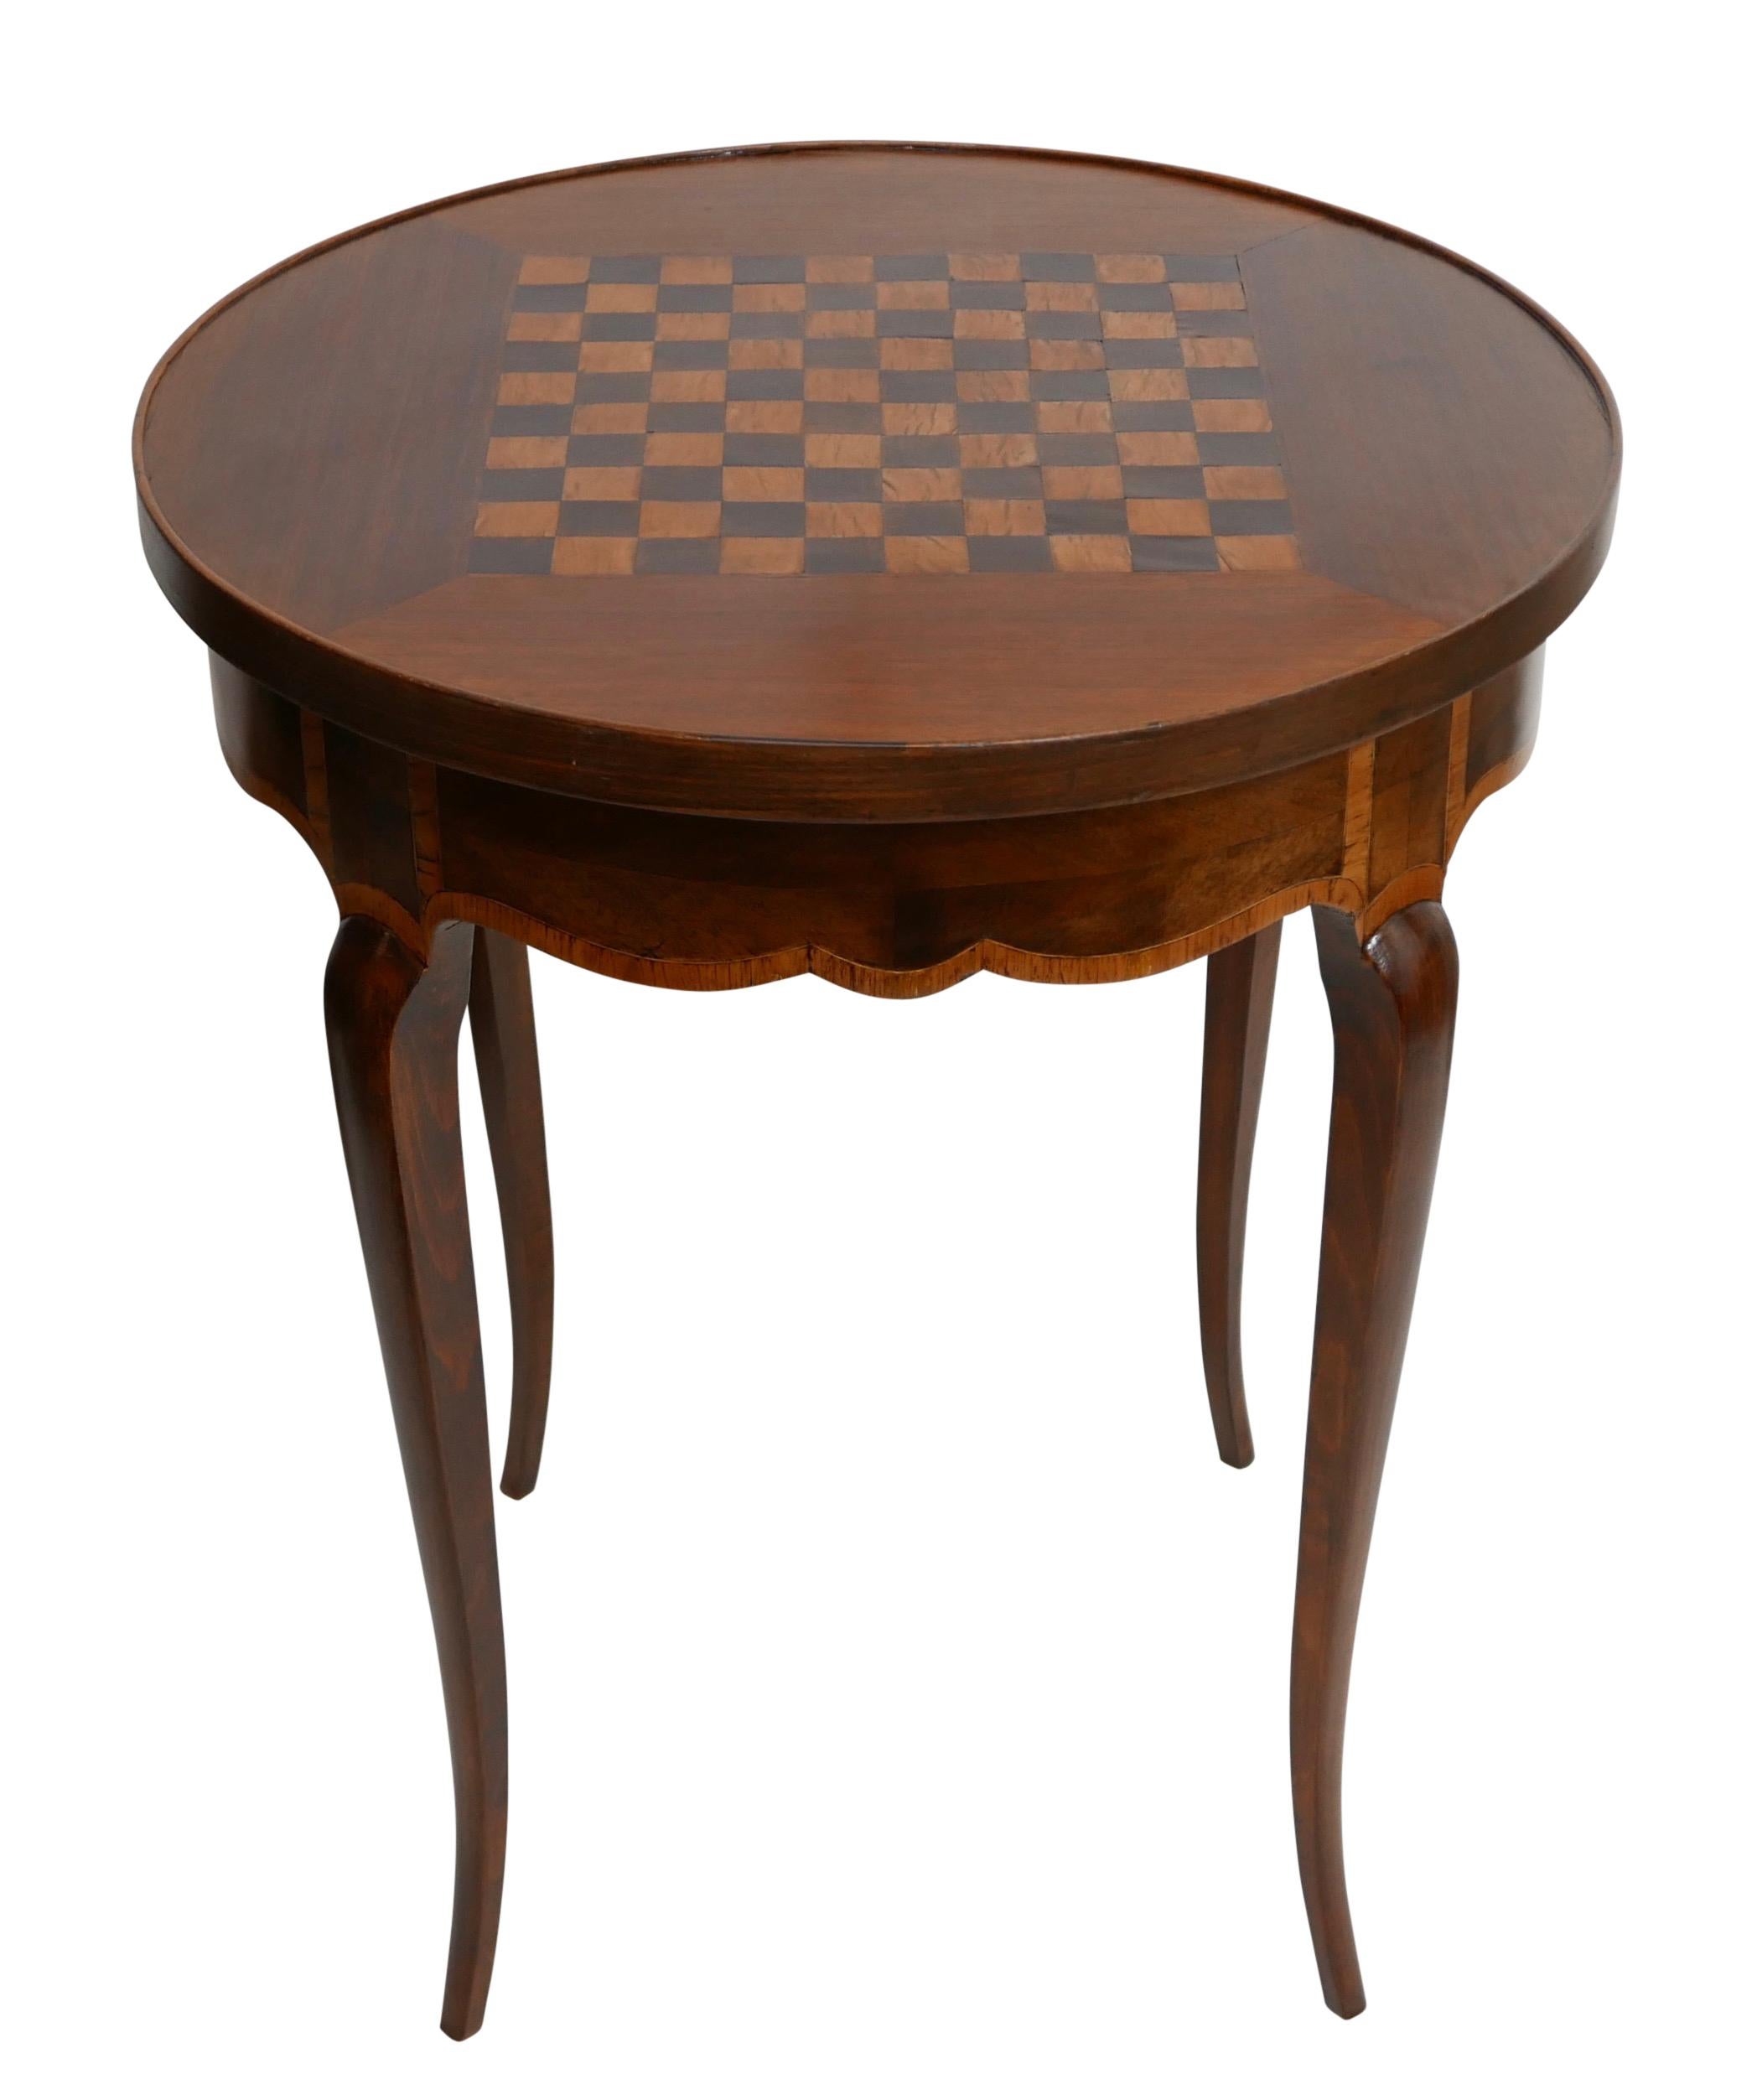 European Walnut Circular Tric Trac Game Table with Fruitwood Inlay, Mid-19th Century